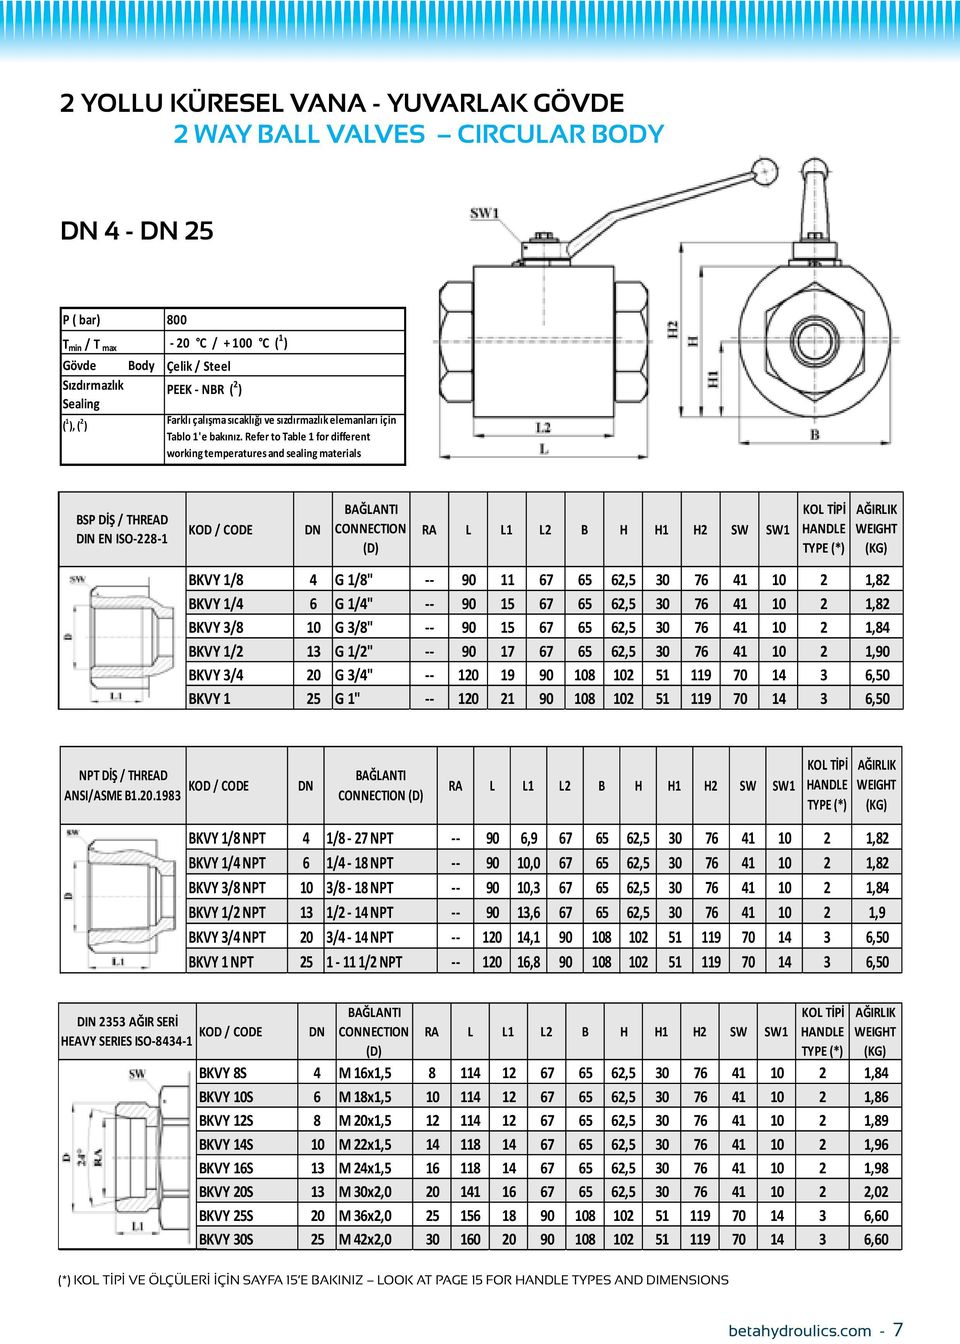 Refer to Table 1 for different working temperatures and sealing materials BSP DİŞ / THREAD DIN EN ISO-228-1 DN CONNECTION (D) RA L L1 L2 B H H1 H2 SW SW1 BKVY 1/8 4 G 1/8" -- 90 11 67 65 62,5 30 76